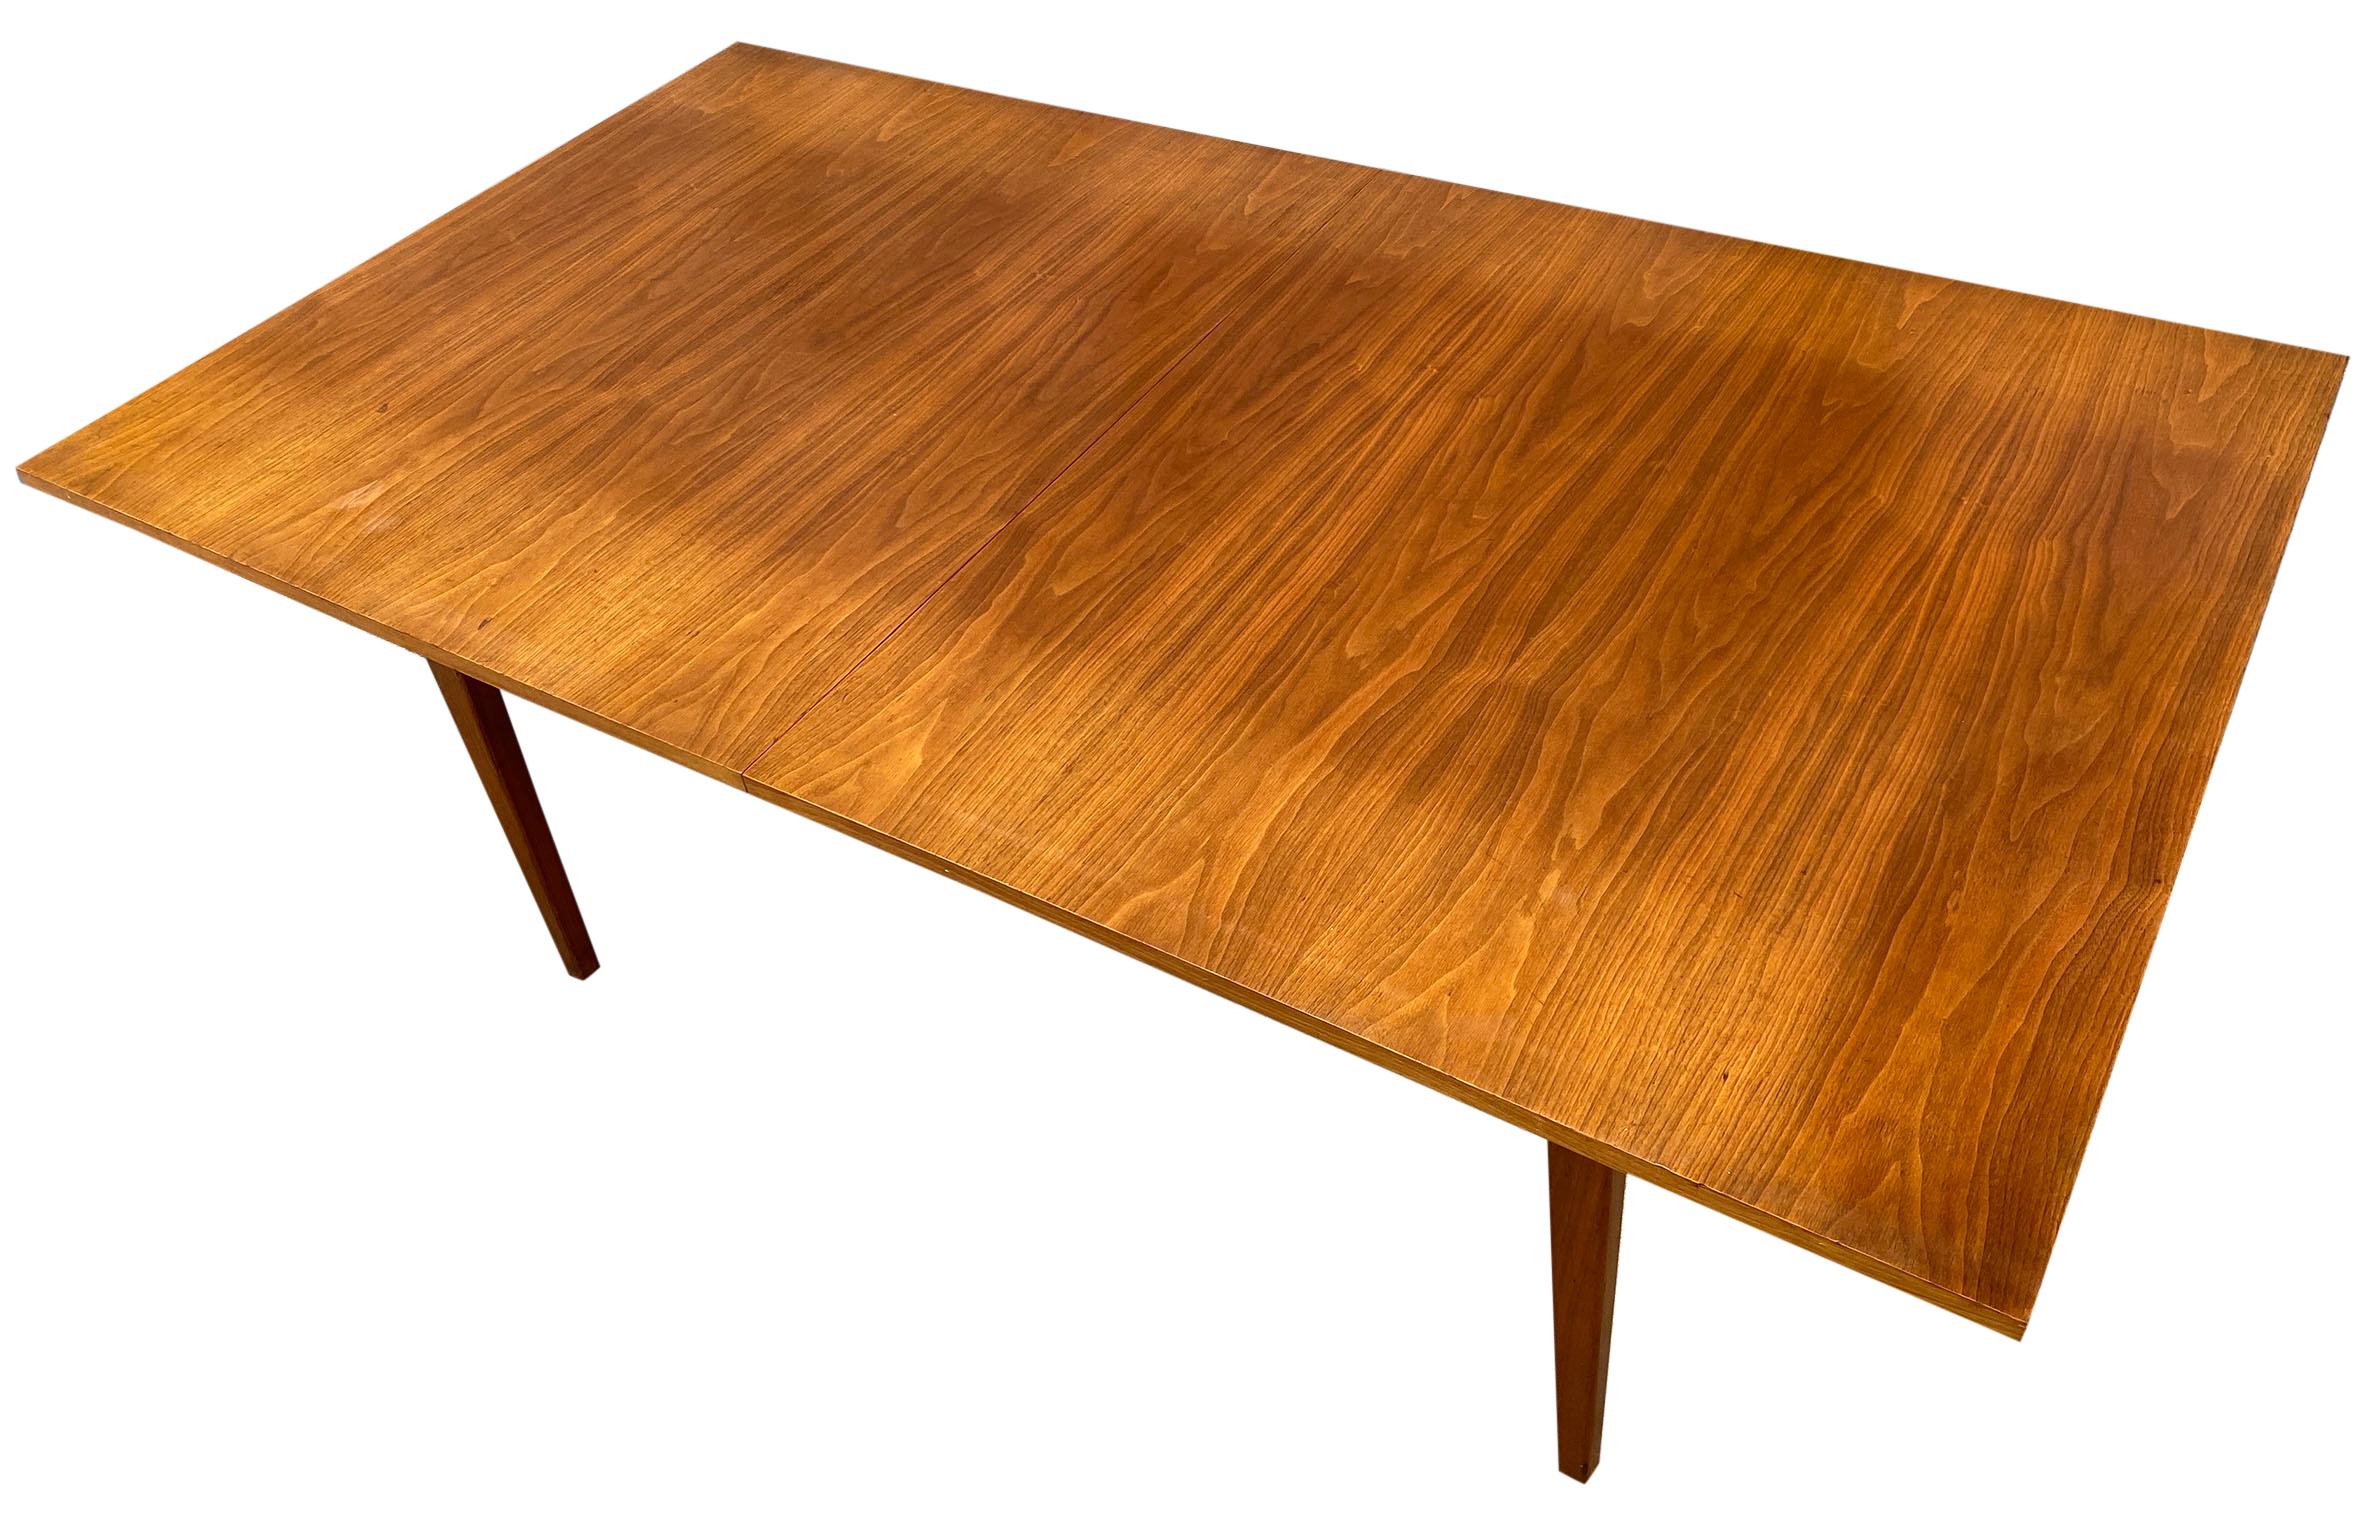 Mid-Century Modern American Danish style dining table. Beautiful wood walnut veneer table top. Solid walnut table base and legs. Made circa 1960. Original finish in good vintage condition has slight sun fade on top from runner and leaves match the